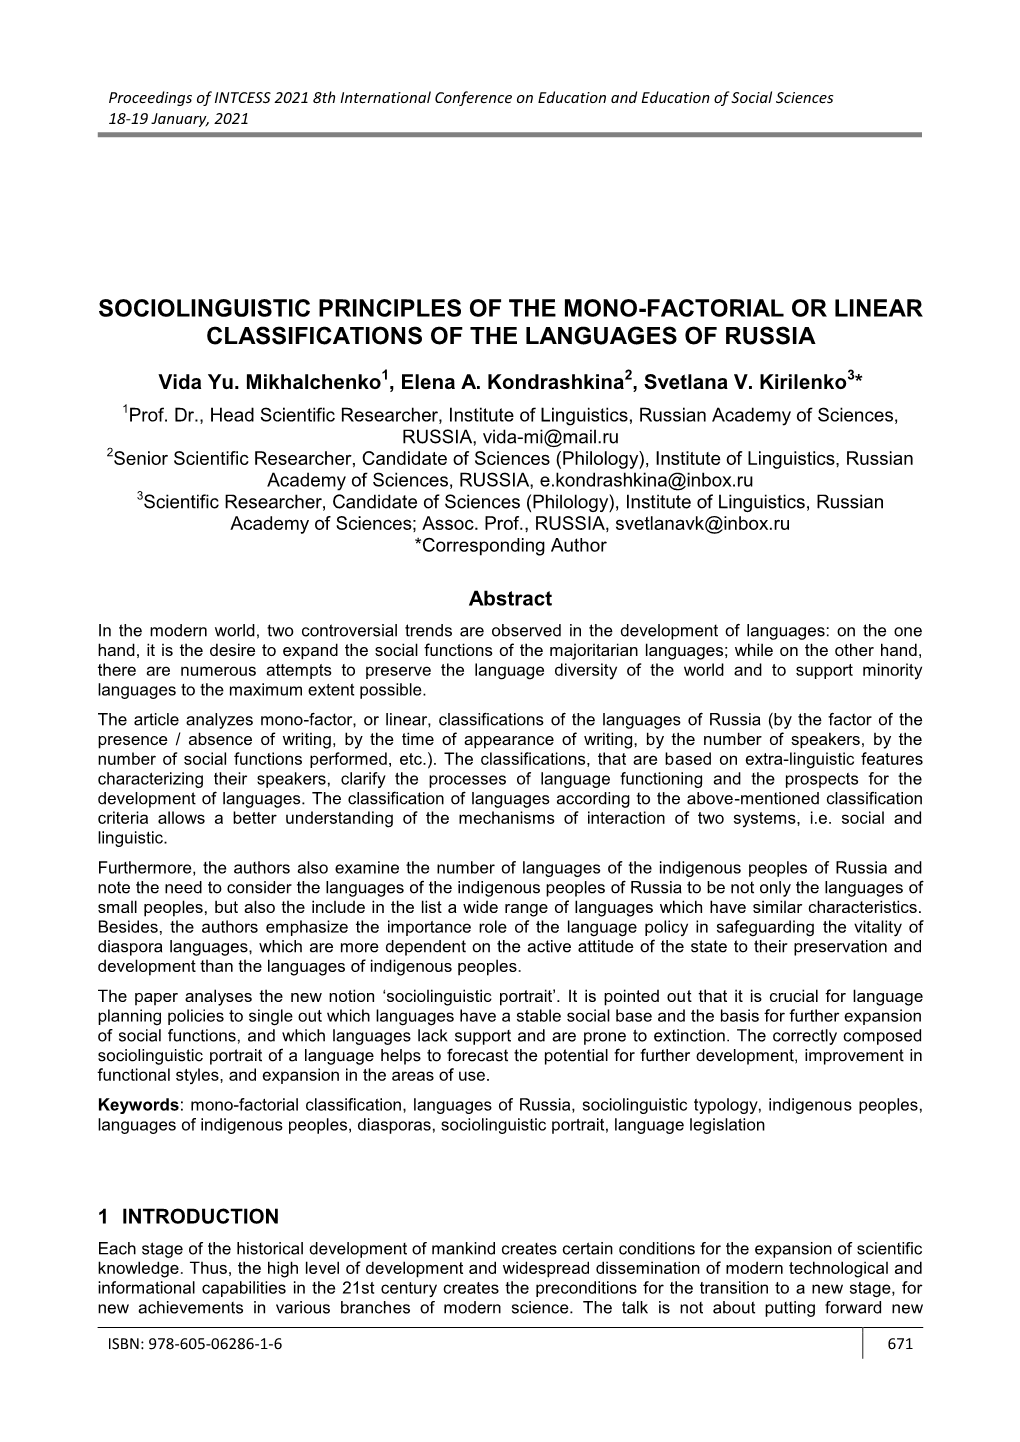 Sociolinguistic Principles of the Mono-Factorial Or Linear Classifications of the Languages of Russia